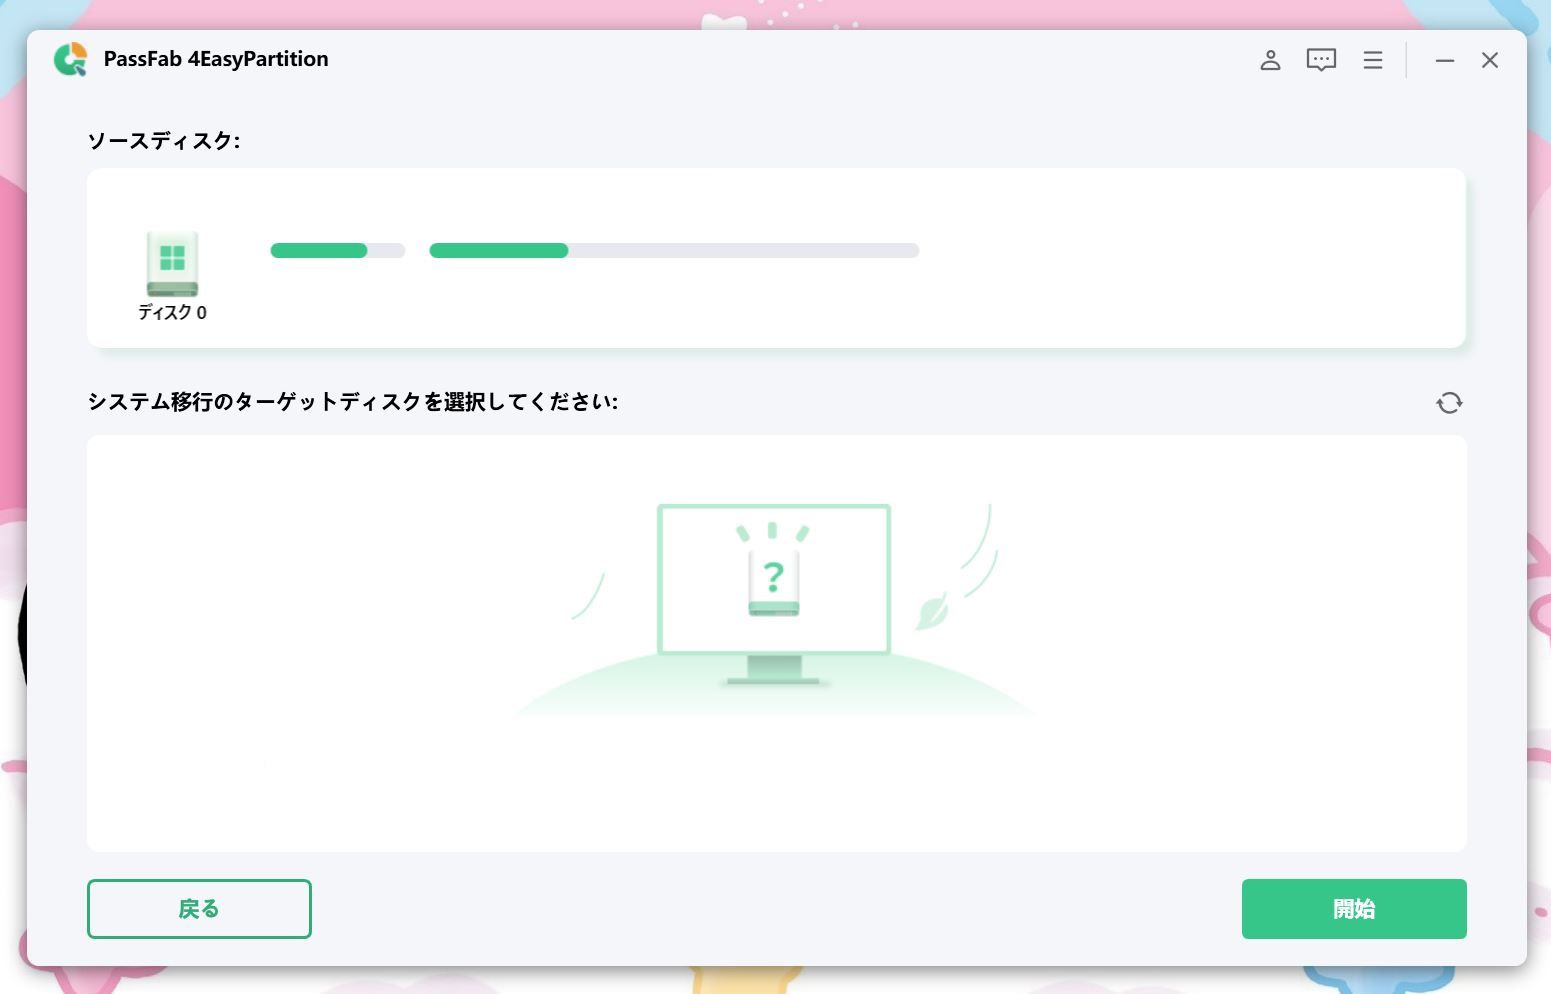 PassFab 4EasyPartitionの起動画面